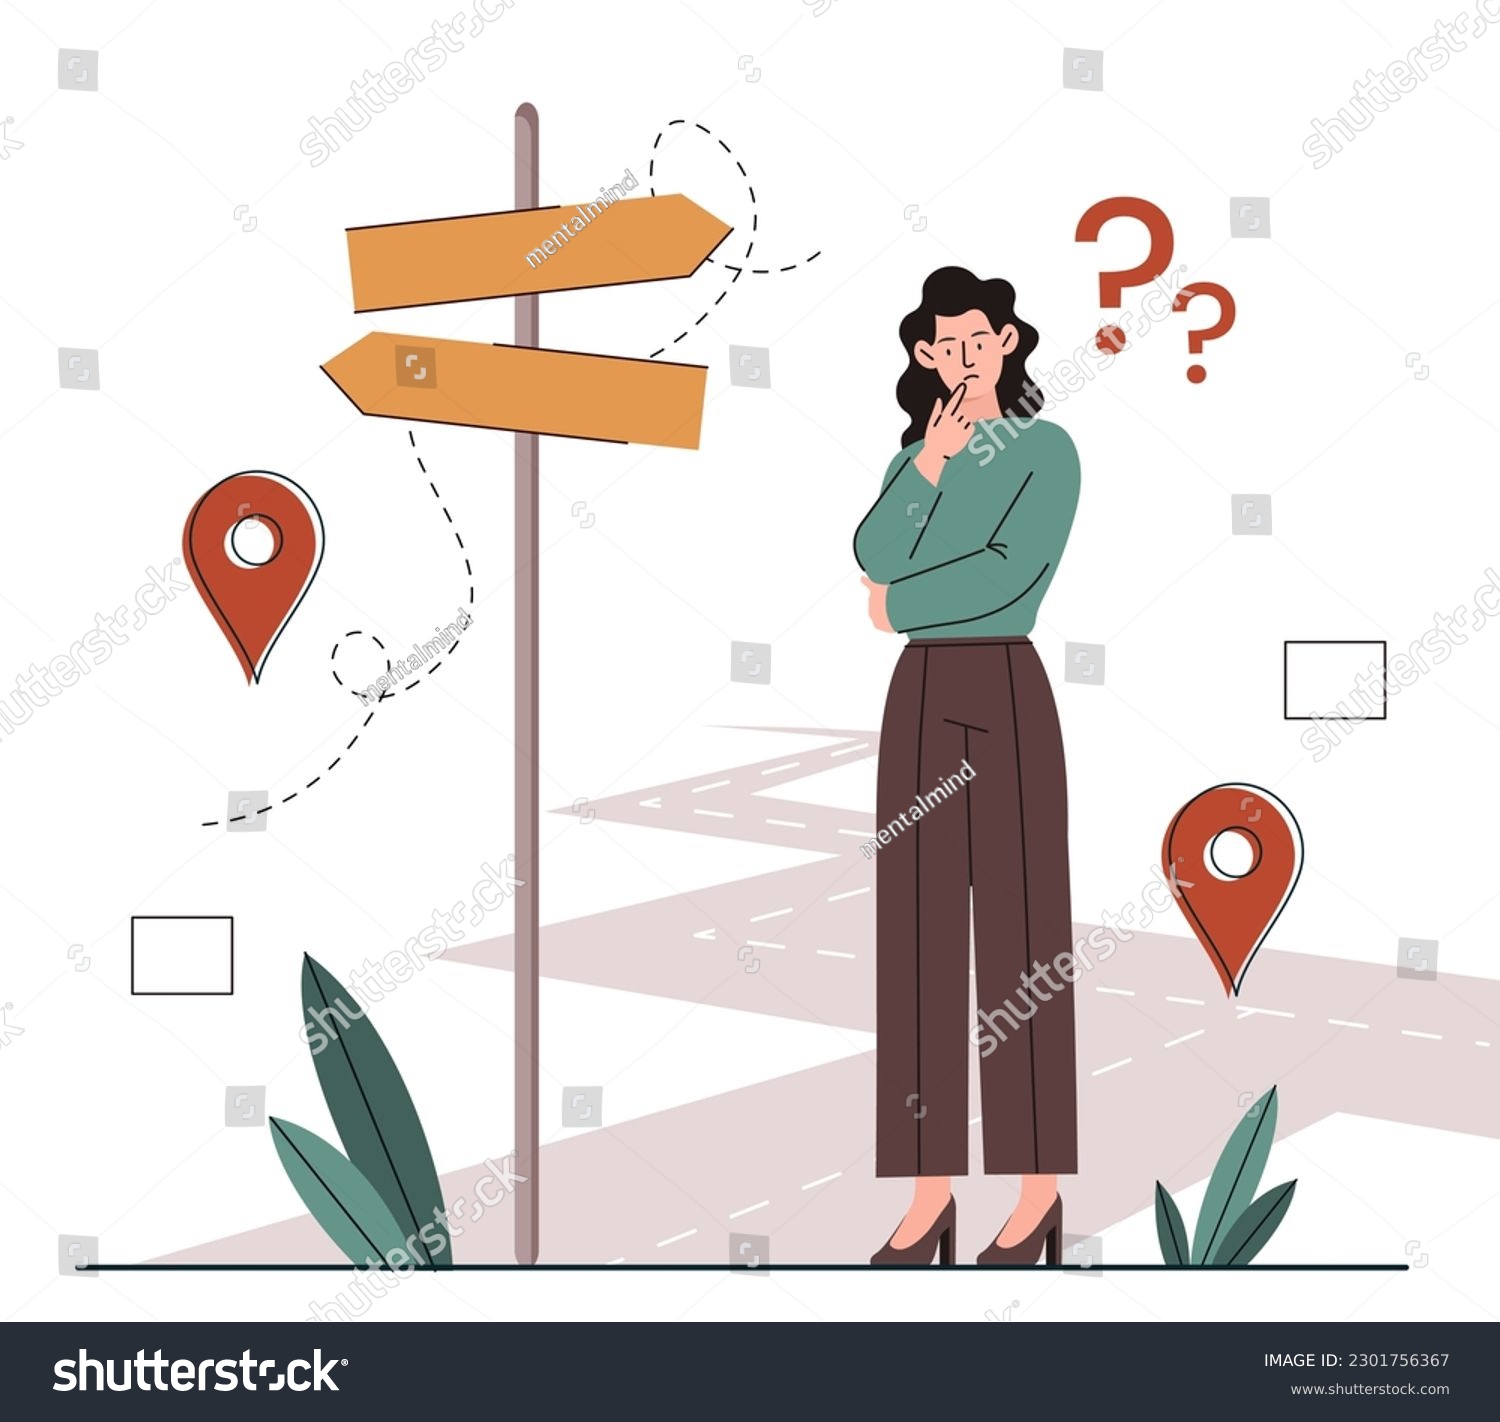 Woman on way. Young girl stands on road near signboard. Metaphor for making decision and choosing life path. Navigation and direction at crossroad. Cartoon flat vector illustration #2301756367